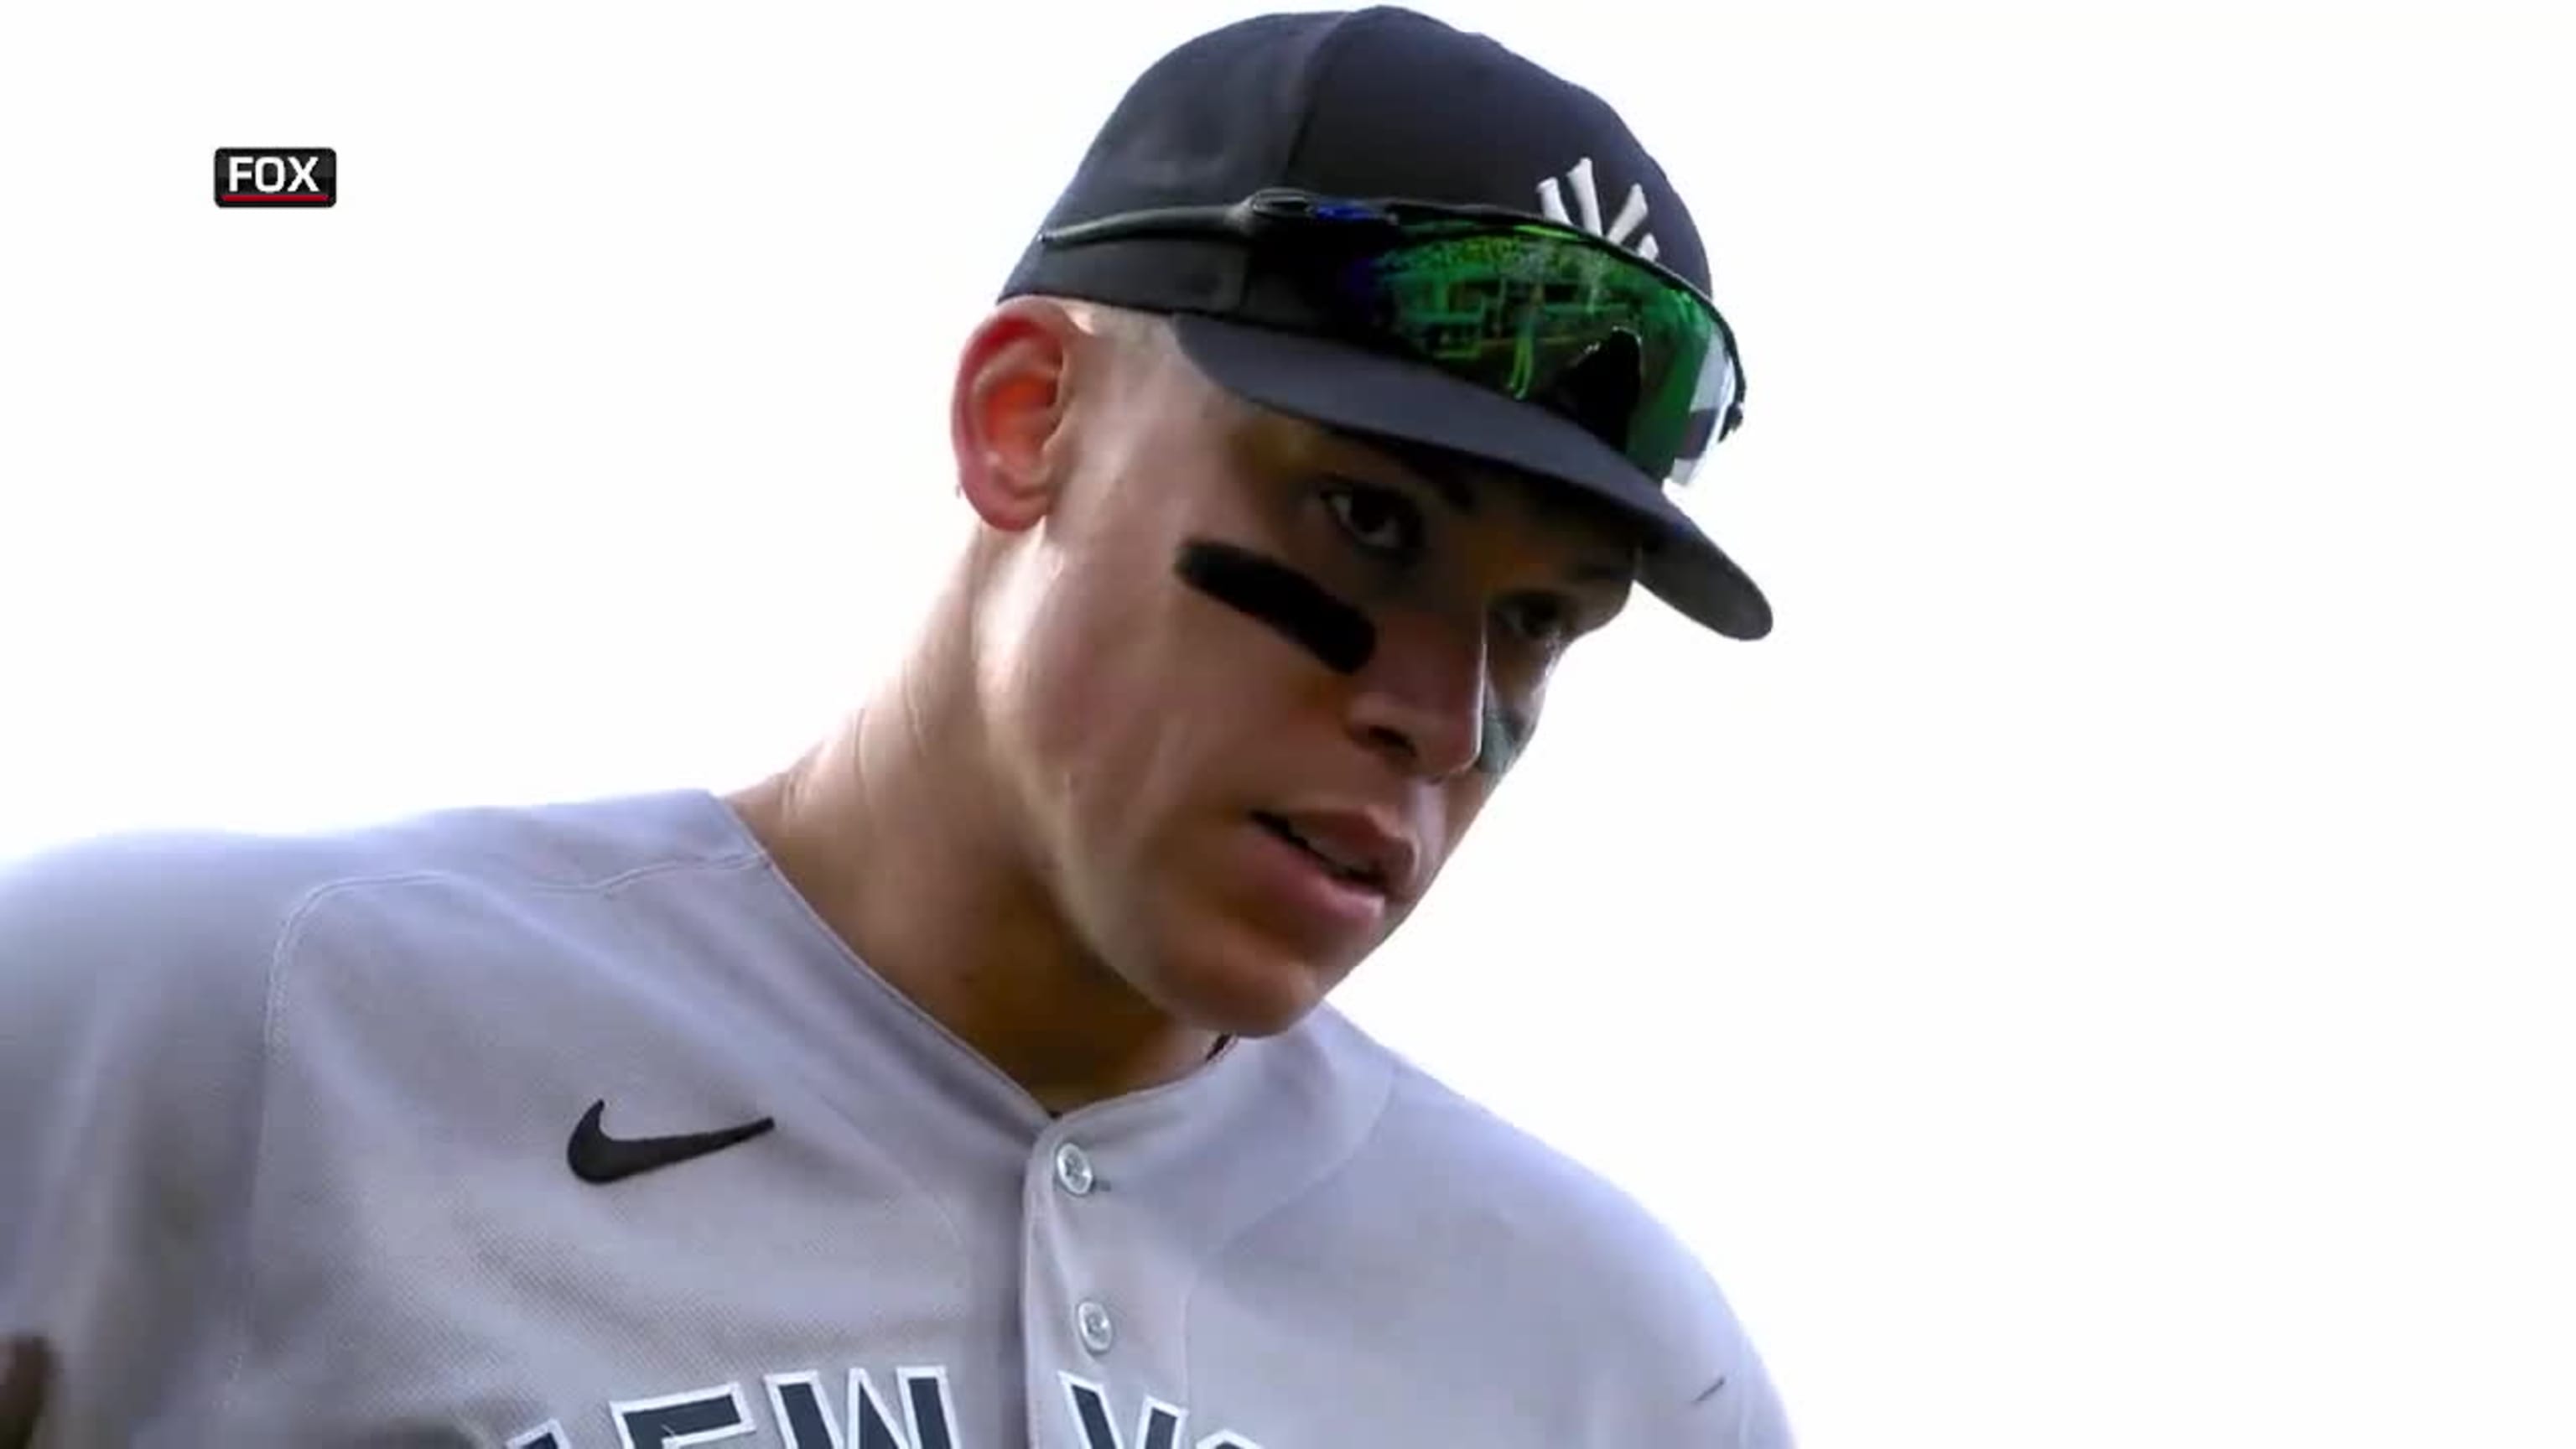 Aaron Judge reveals how Anthony Rizzo convinced him to stay in New